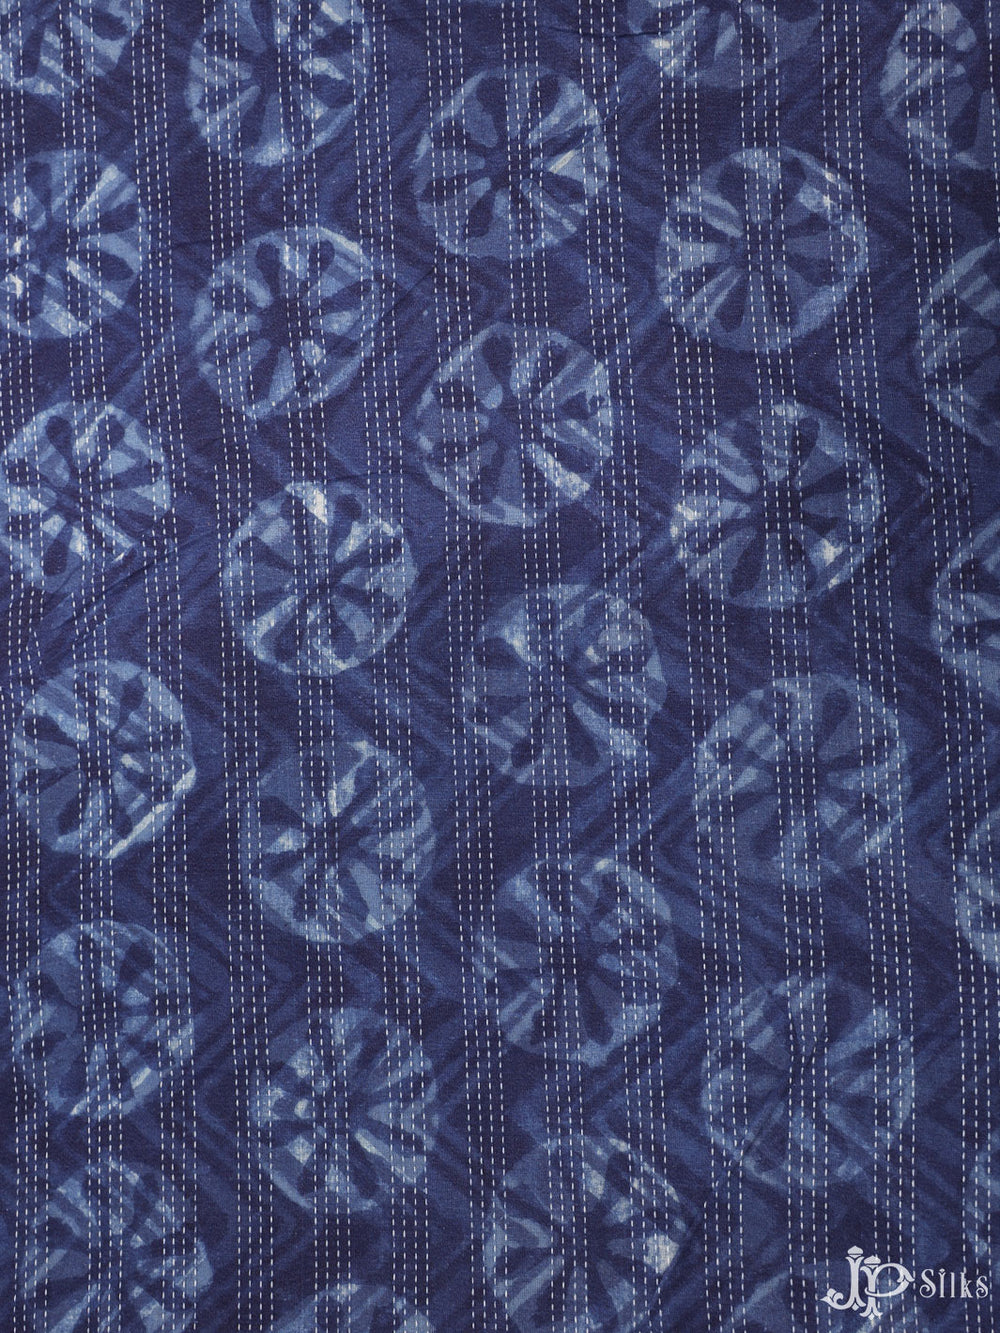 Navy Blue Digital Printed Cotton Fabric - D1773 - View 1